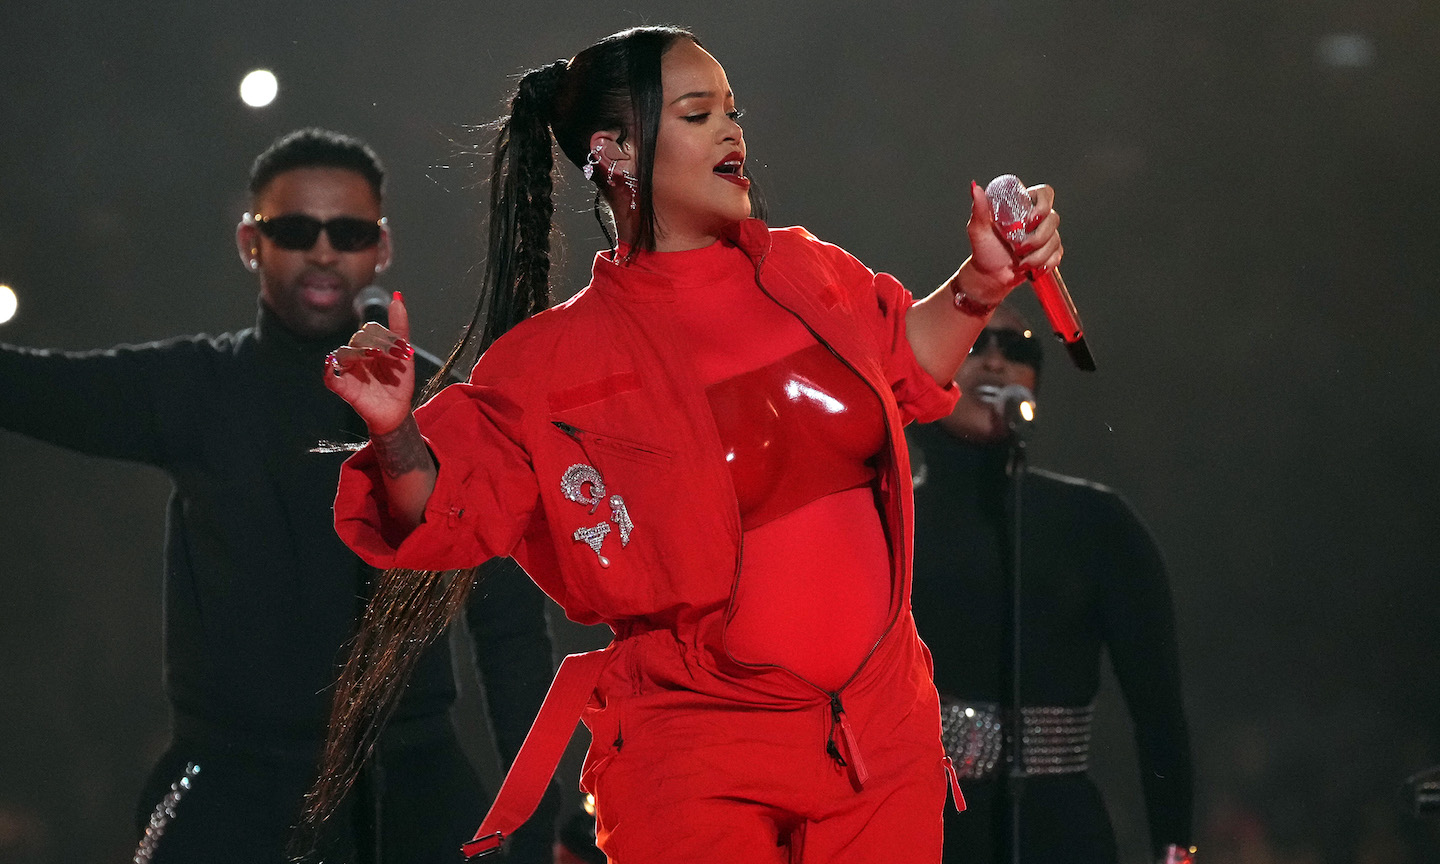 The 10 Best Rihanna Performances of All Time